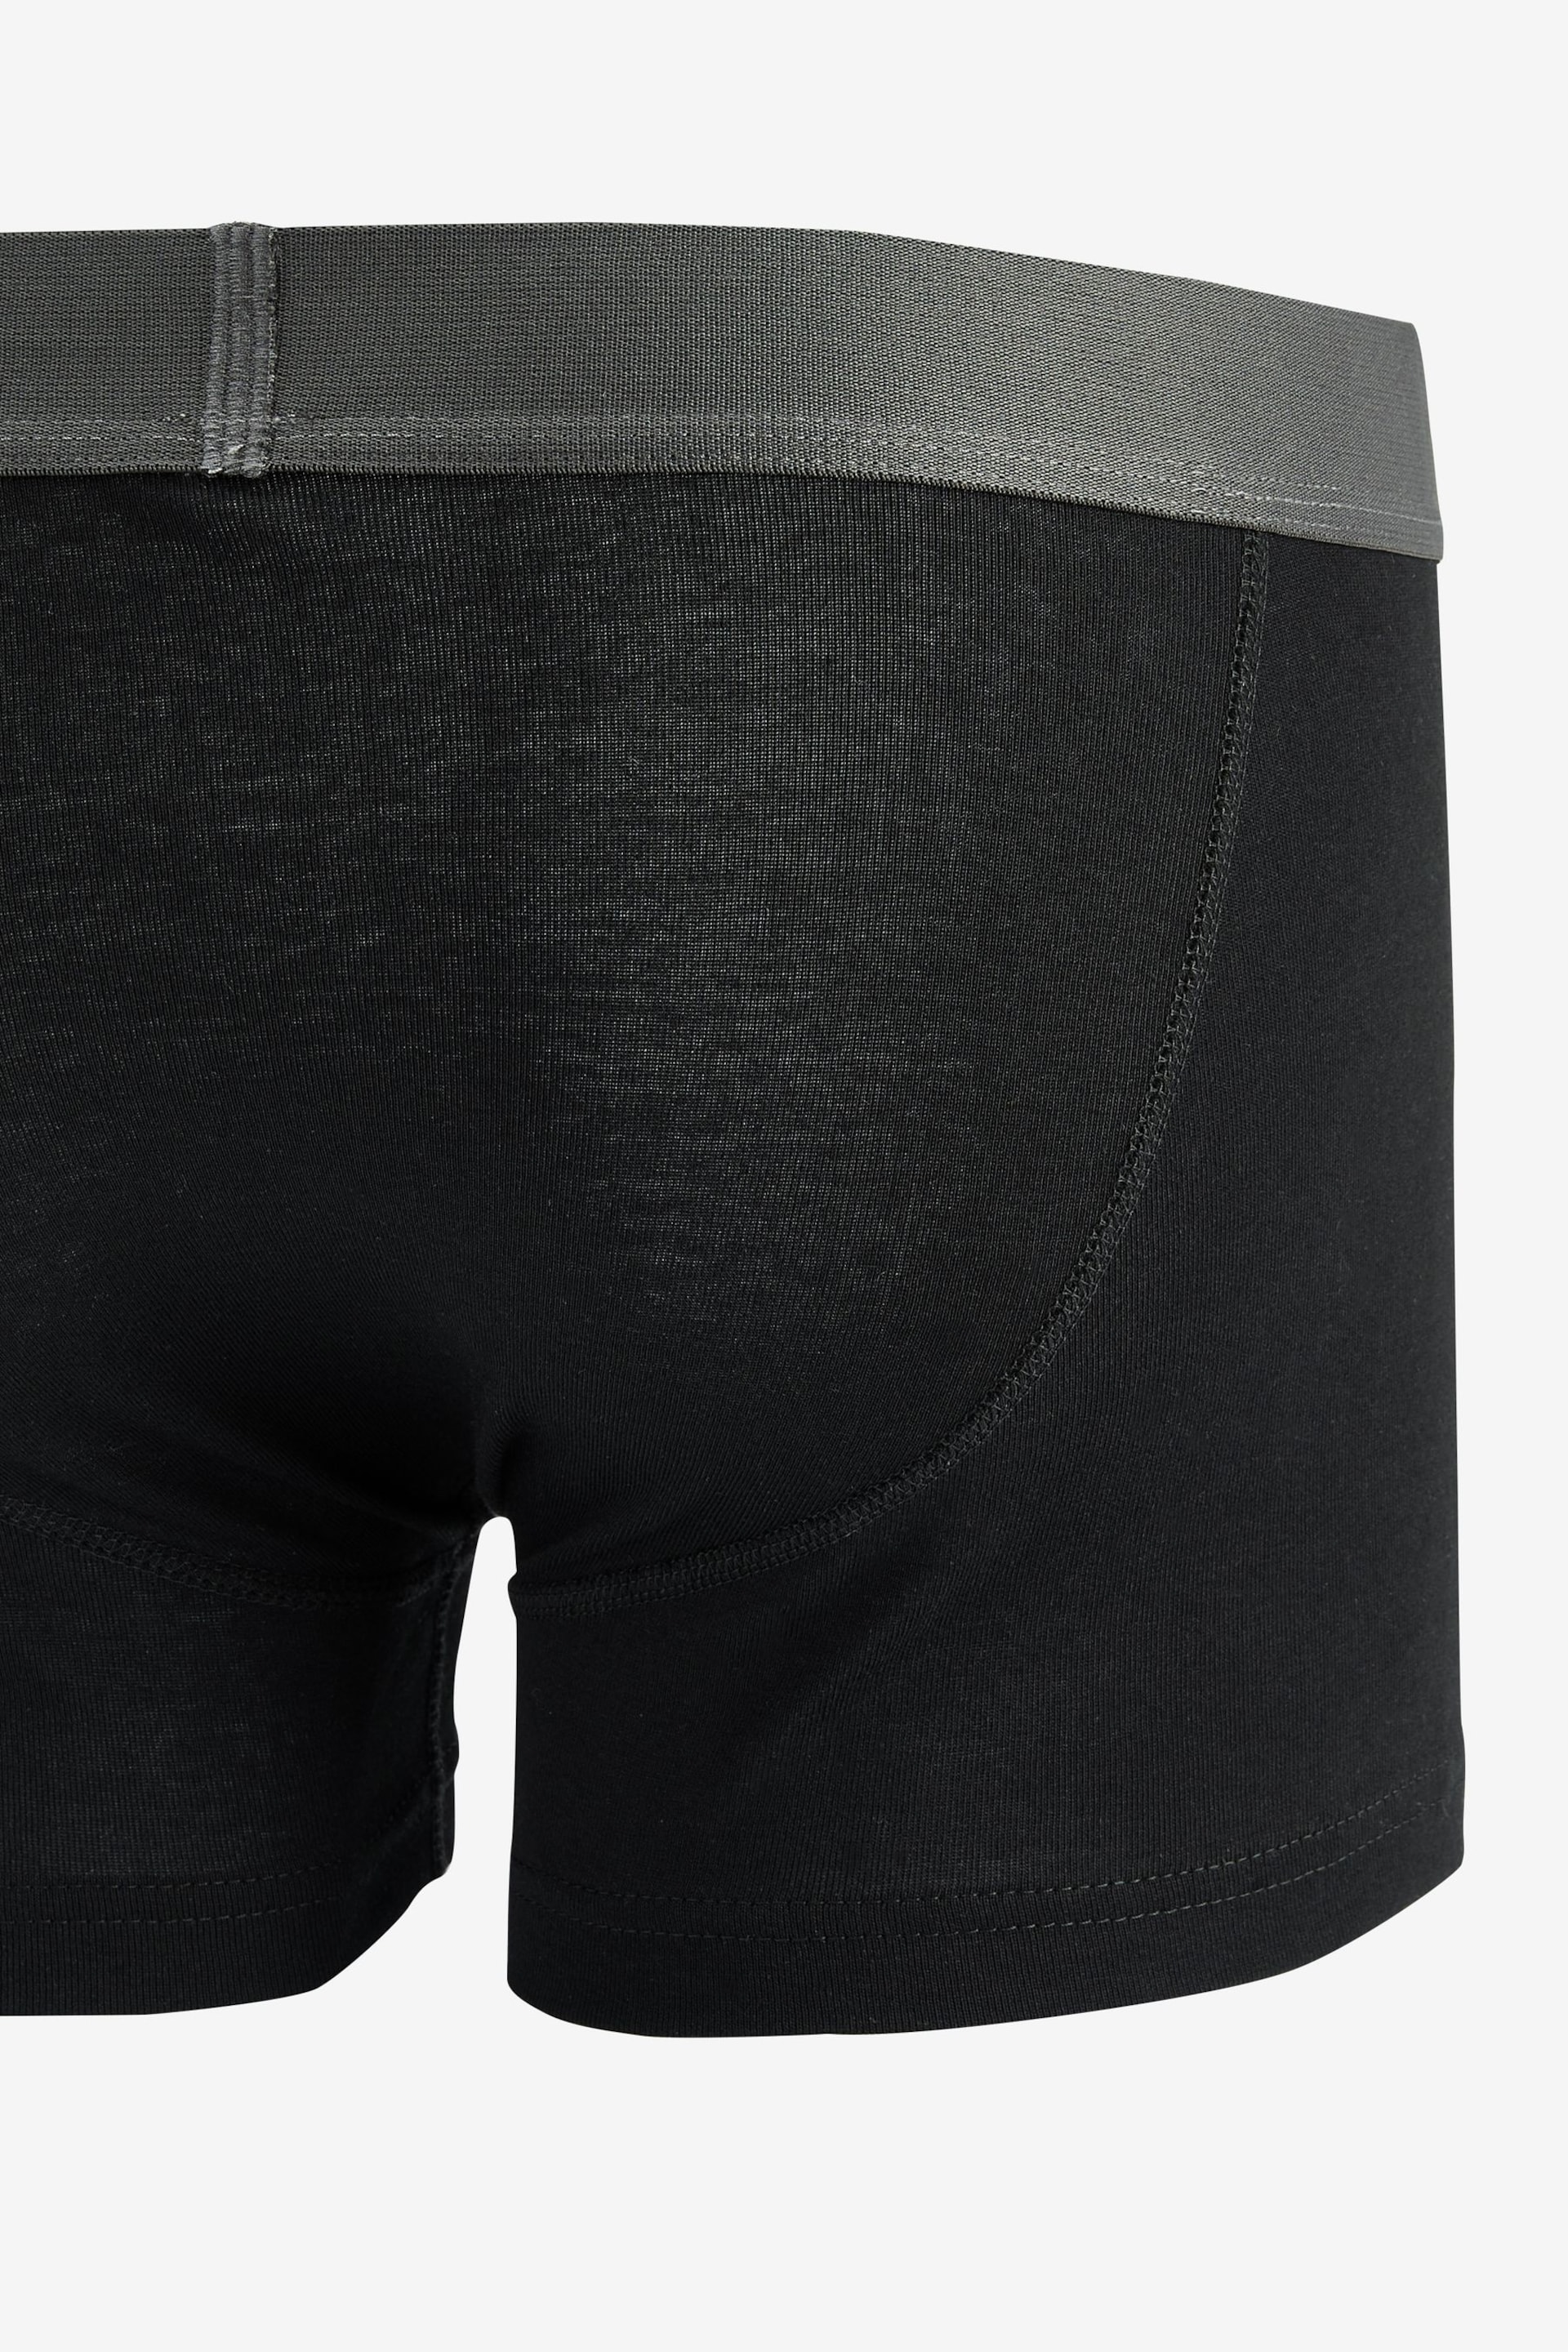 Black 4 pack A-Front Pure Cotton Boxers - Image 3 of 4